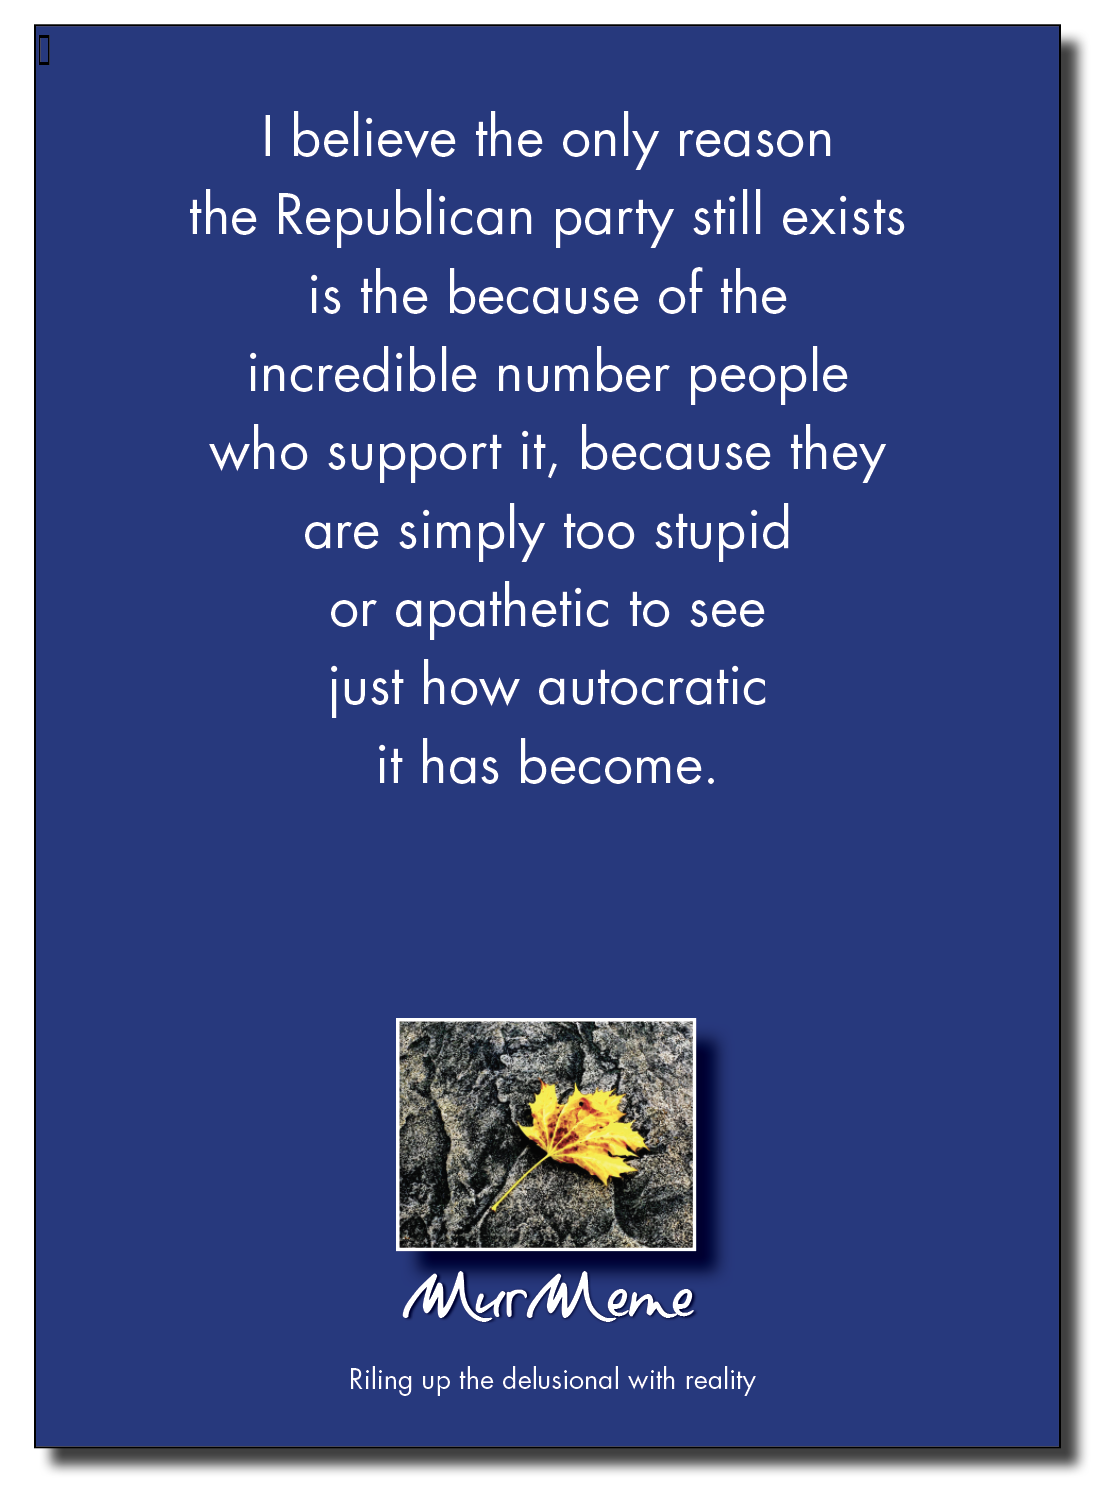 | believe the only reason

the Republican party still exists

is the because of the
incredible number people
who support it, because they
are simply too stupid
or apathetic to see
just how autocratic
it has become.

Riling up the delusional with reality